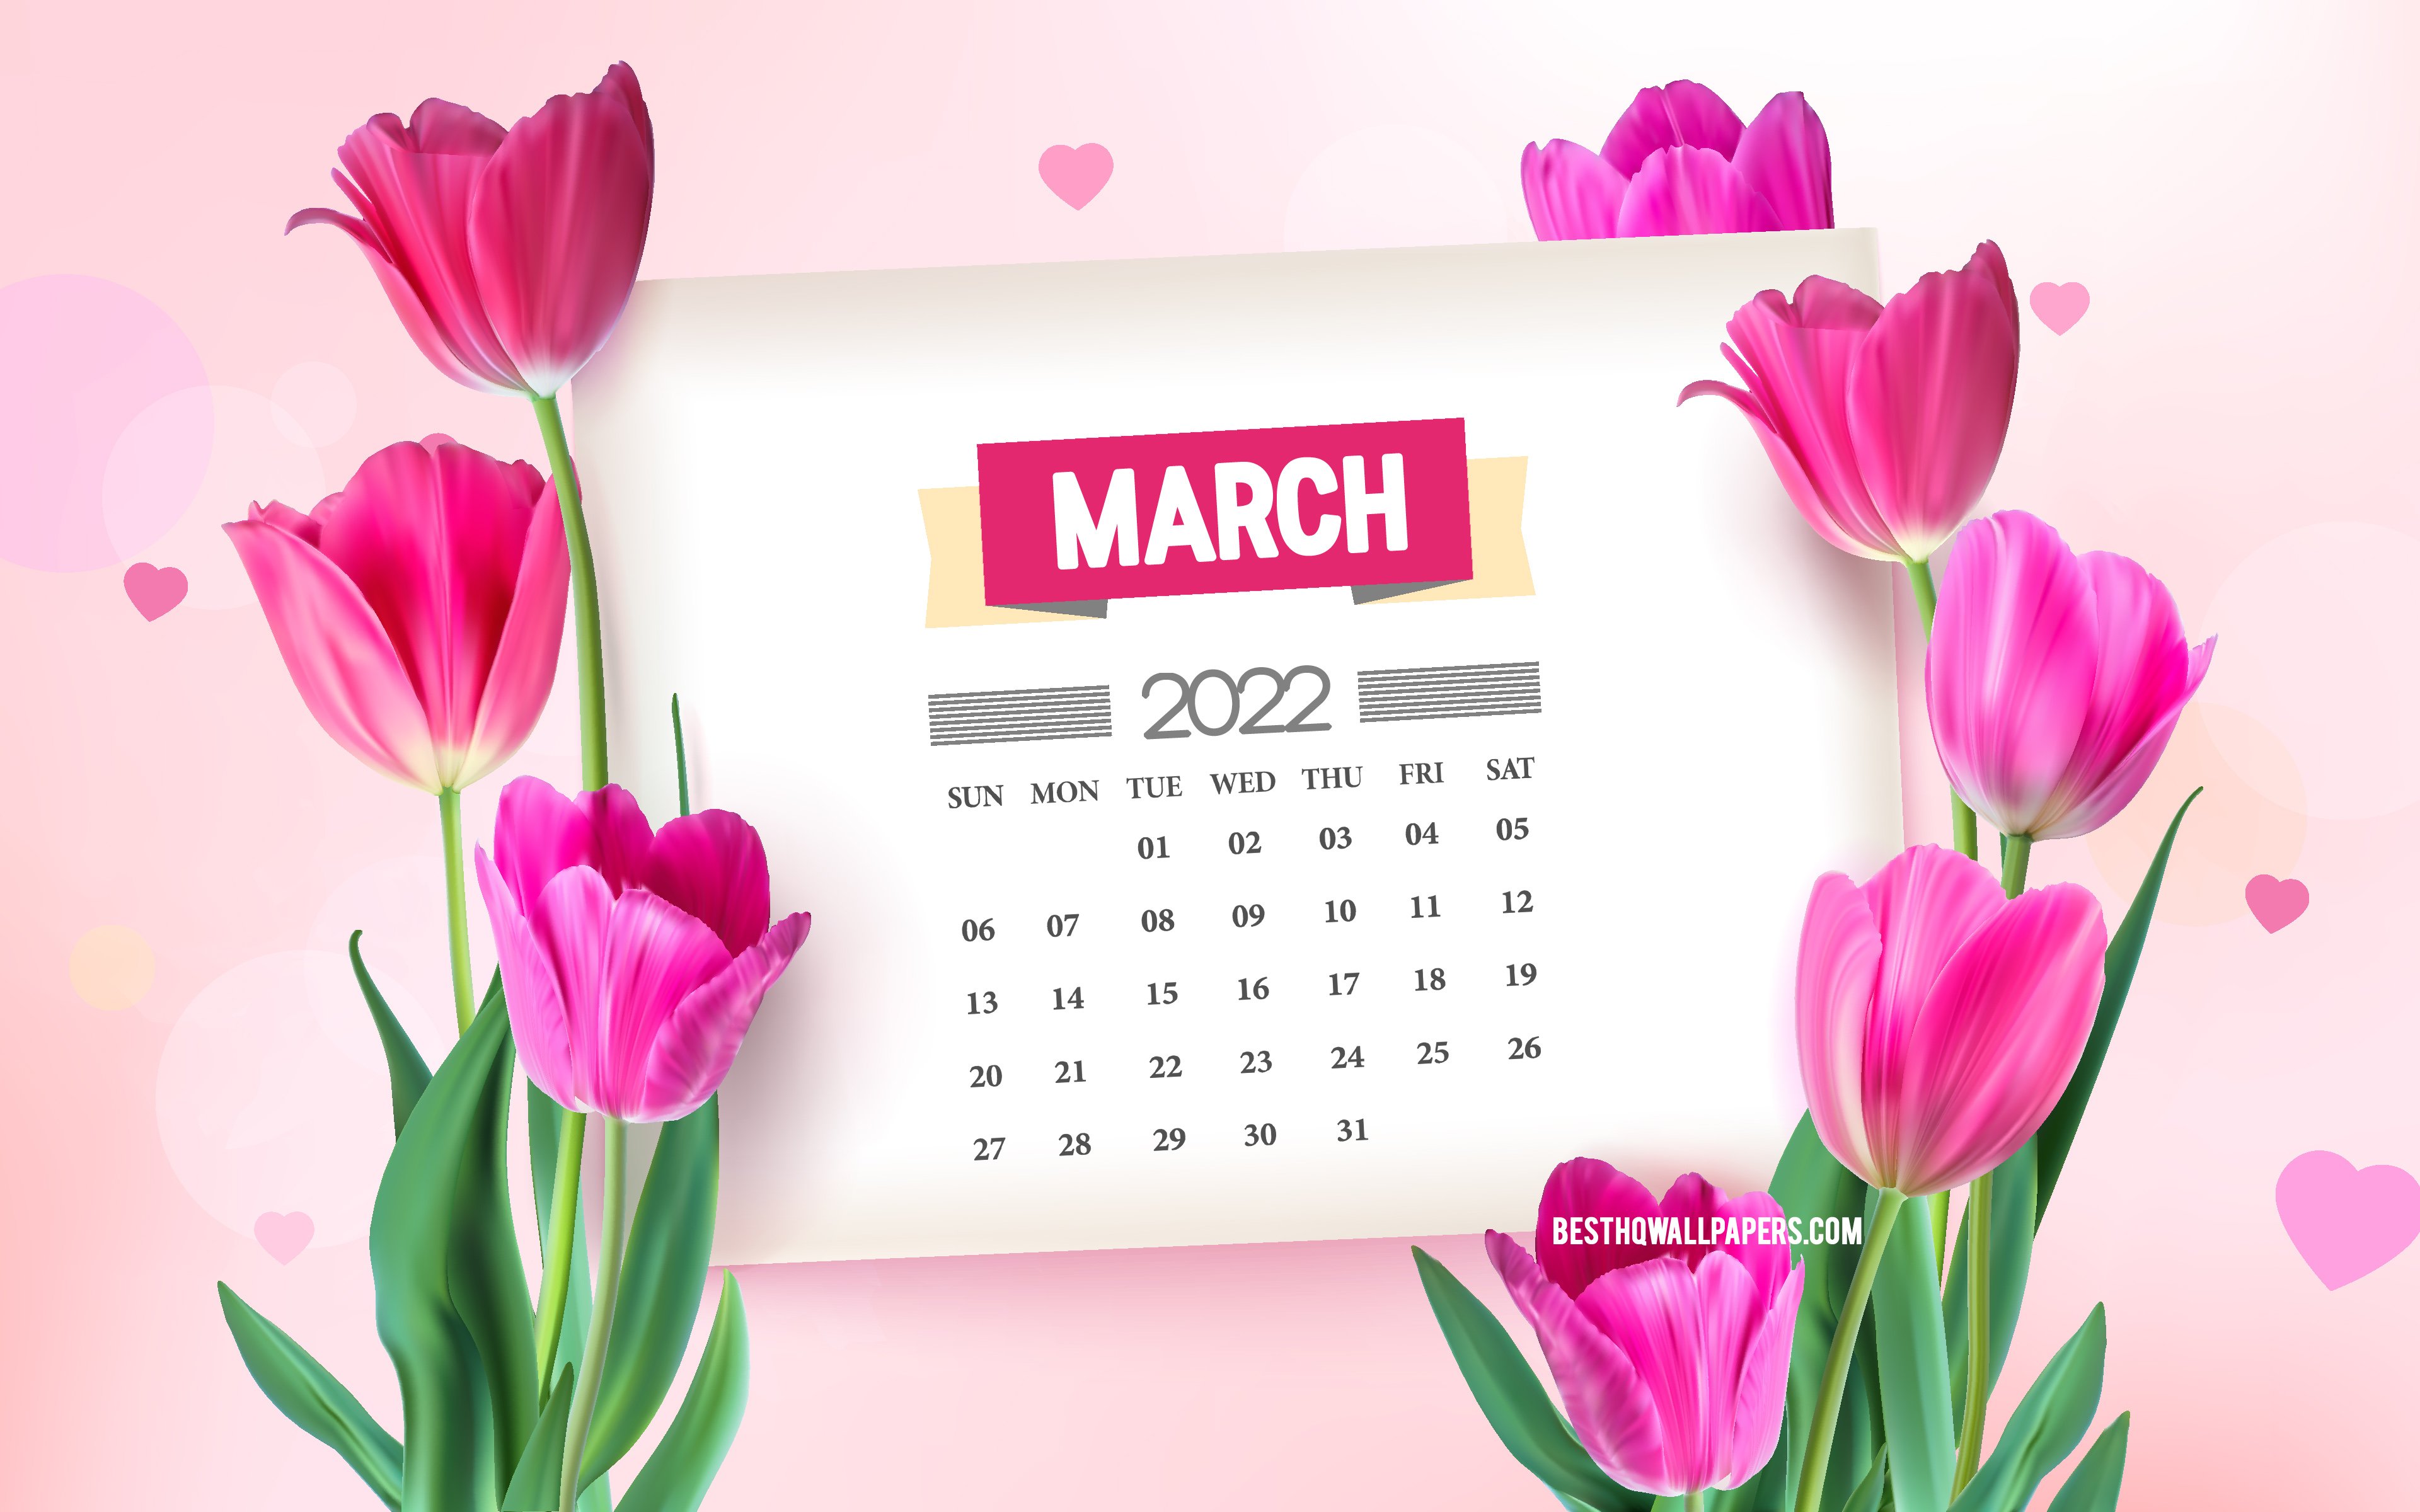 Download wallpaper March 2022 Calendar, 4k, pink tulips, spring background with tulips, March, 2022 spring calendars, spring flowers, 2022 March Calendar for desktop with resolution 3840x2400. High Quality HD picture wallpaper